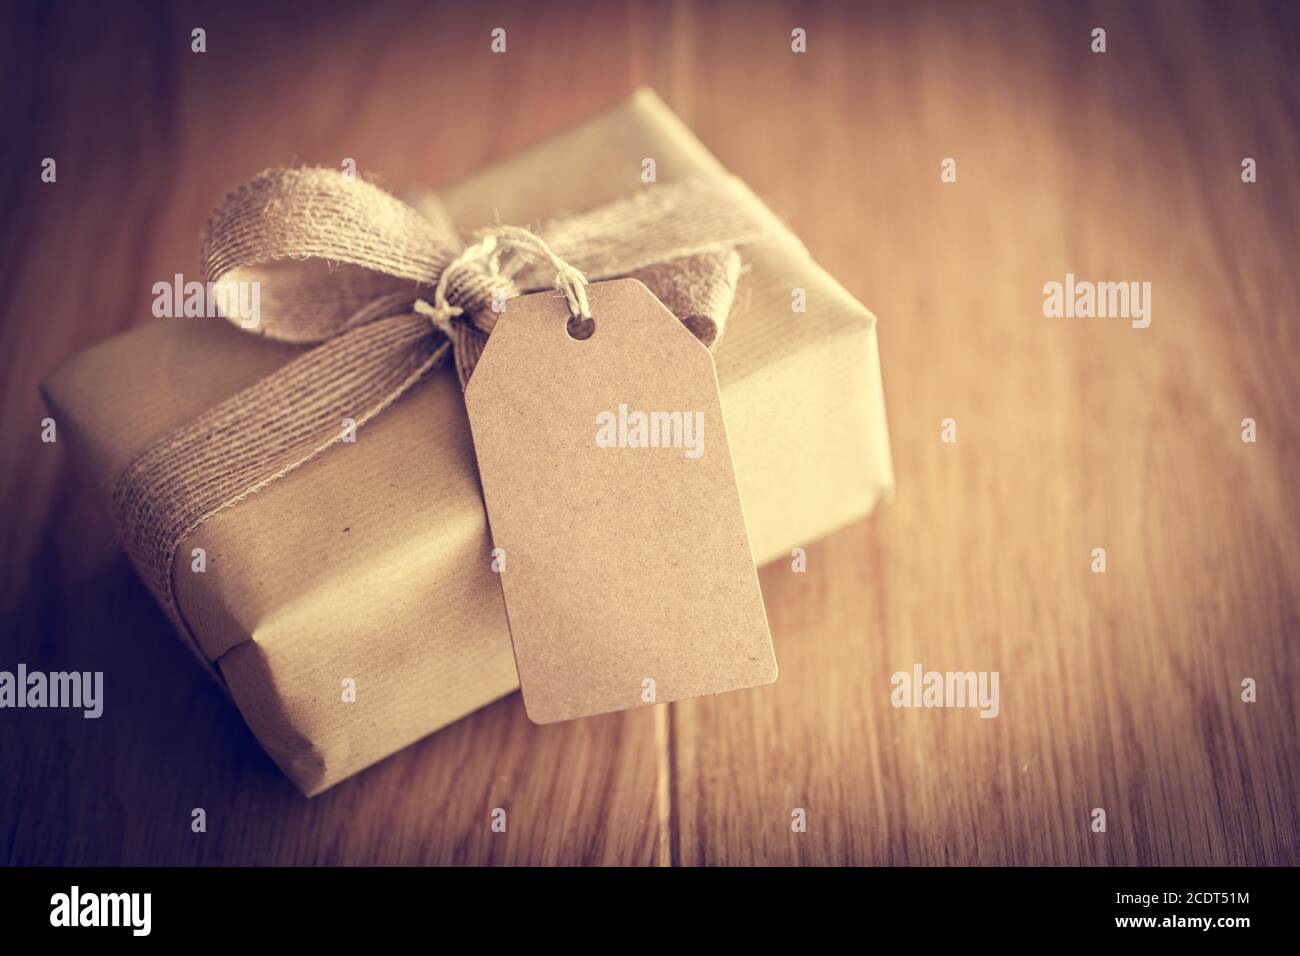 Rustic retro gift, present box with tag. Christmas time, eco paper wrap. Stock Photo